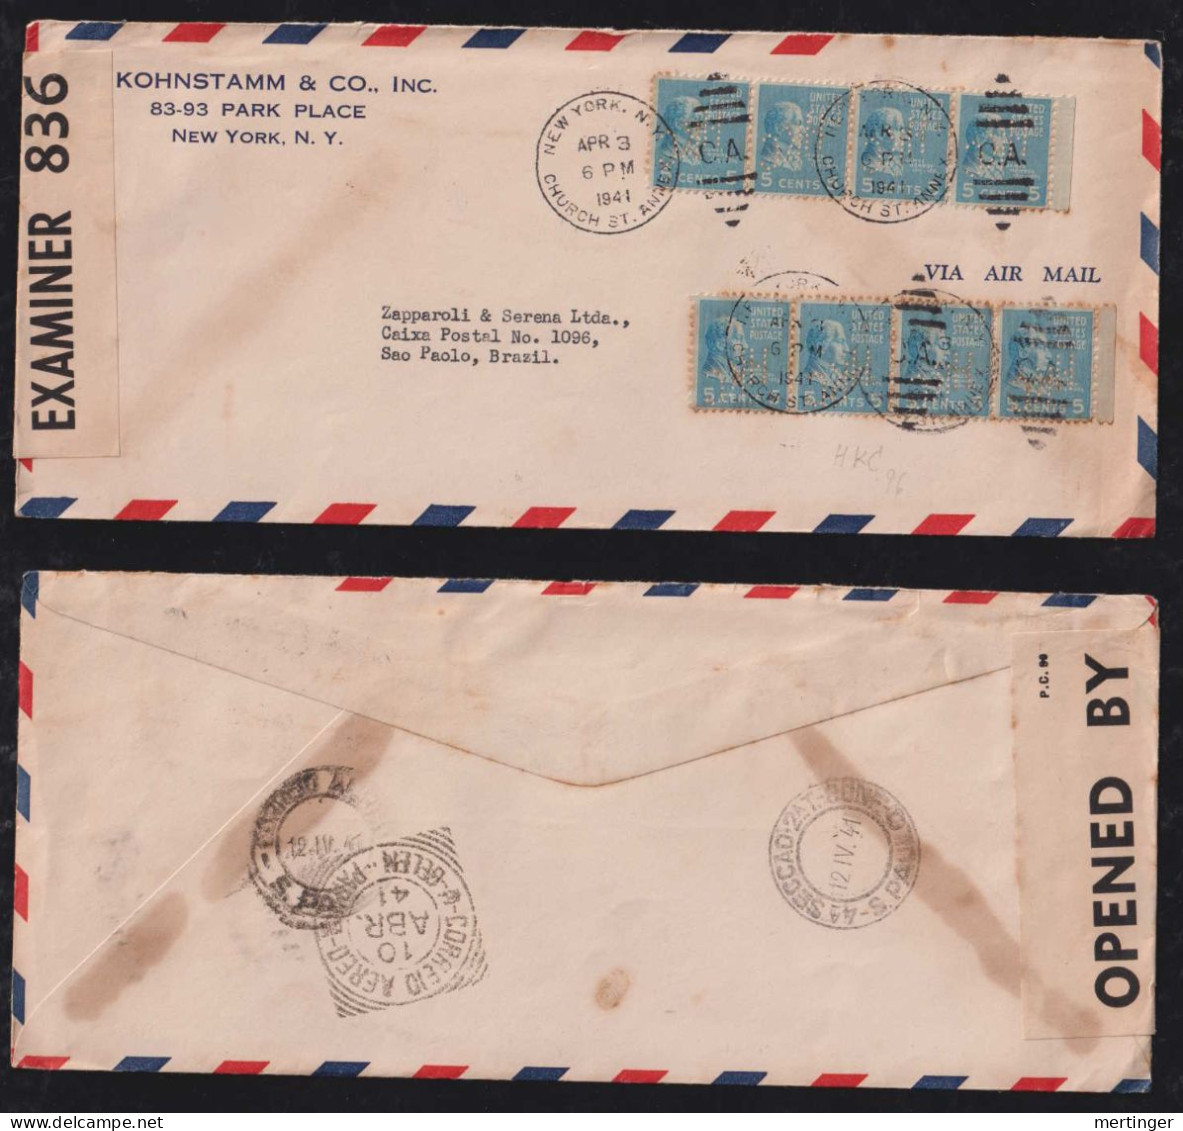 USA 1941 Censor Airmail Cover Perfin HKC NEW YORK To SAO PAULO Brasil - Covers & Documents